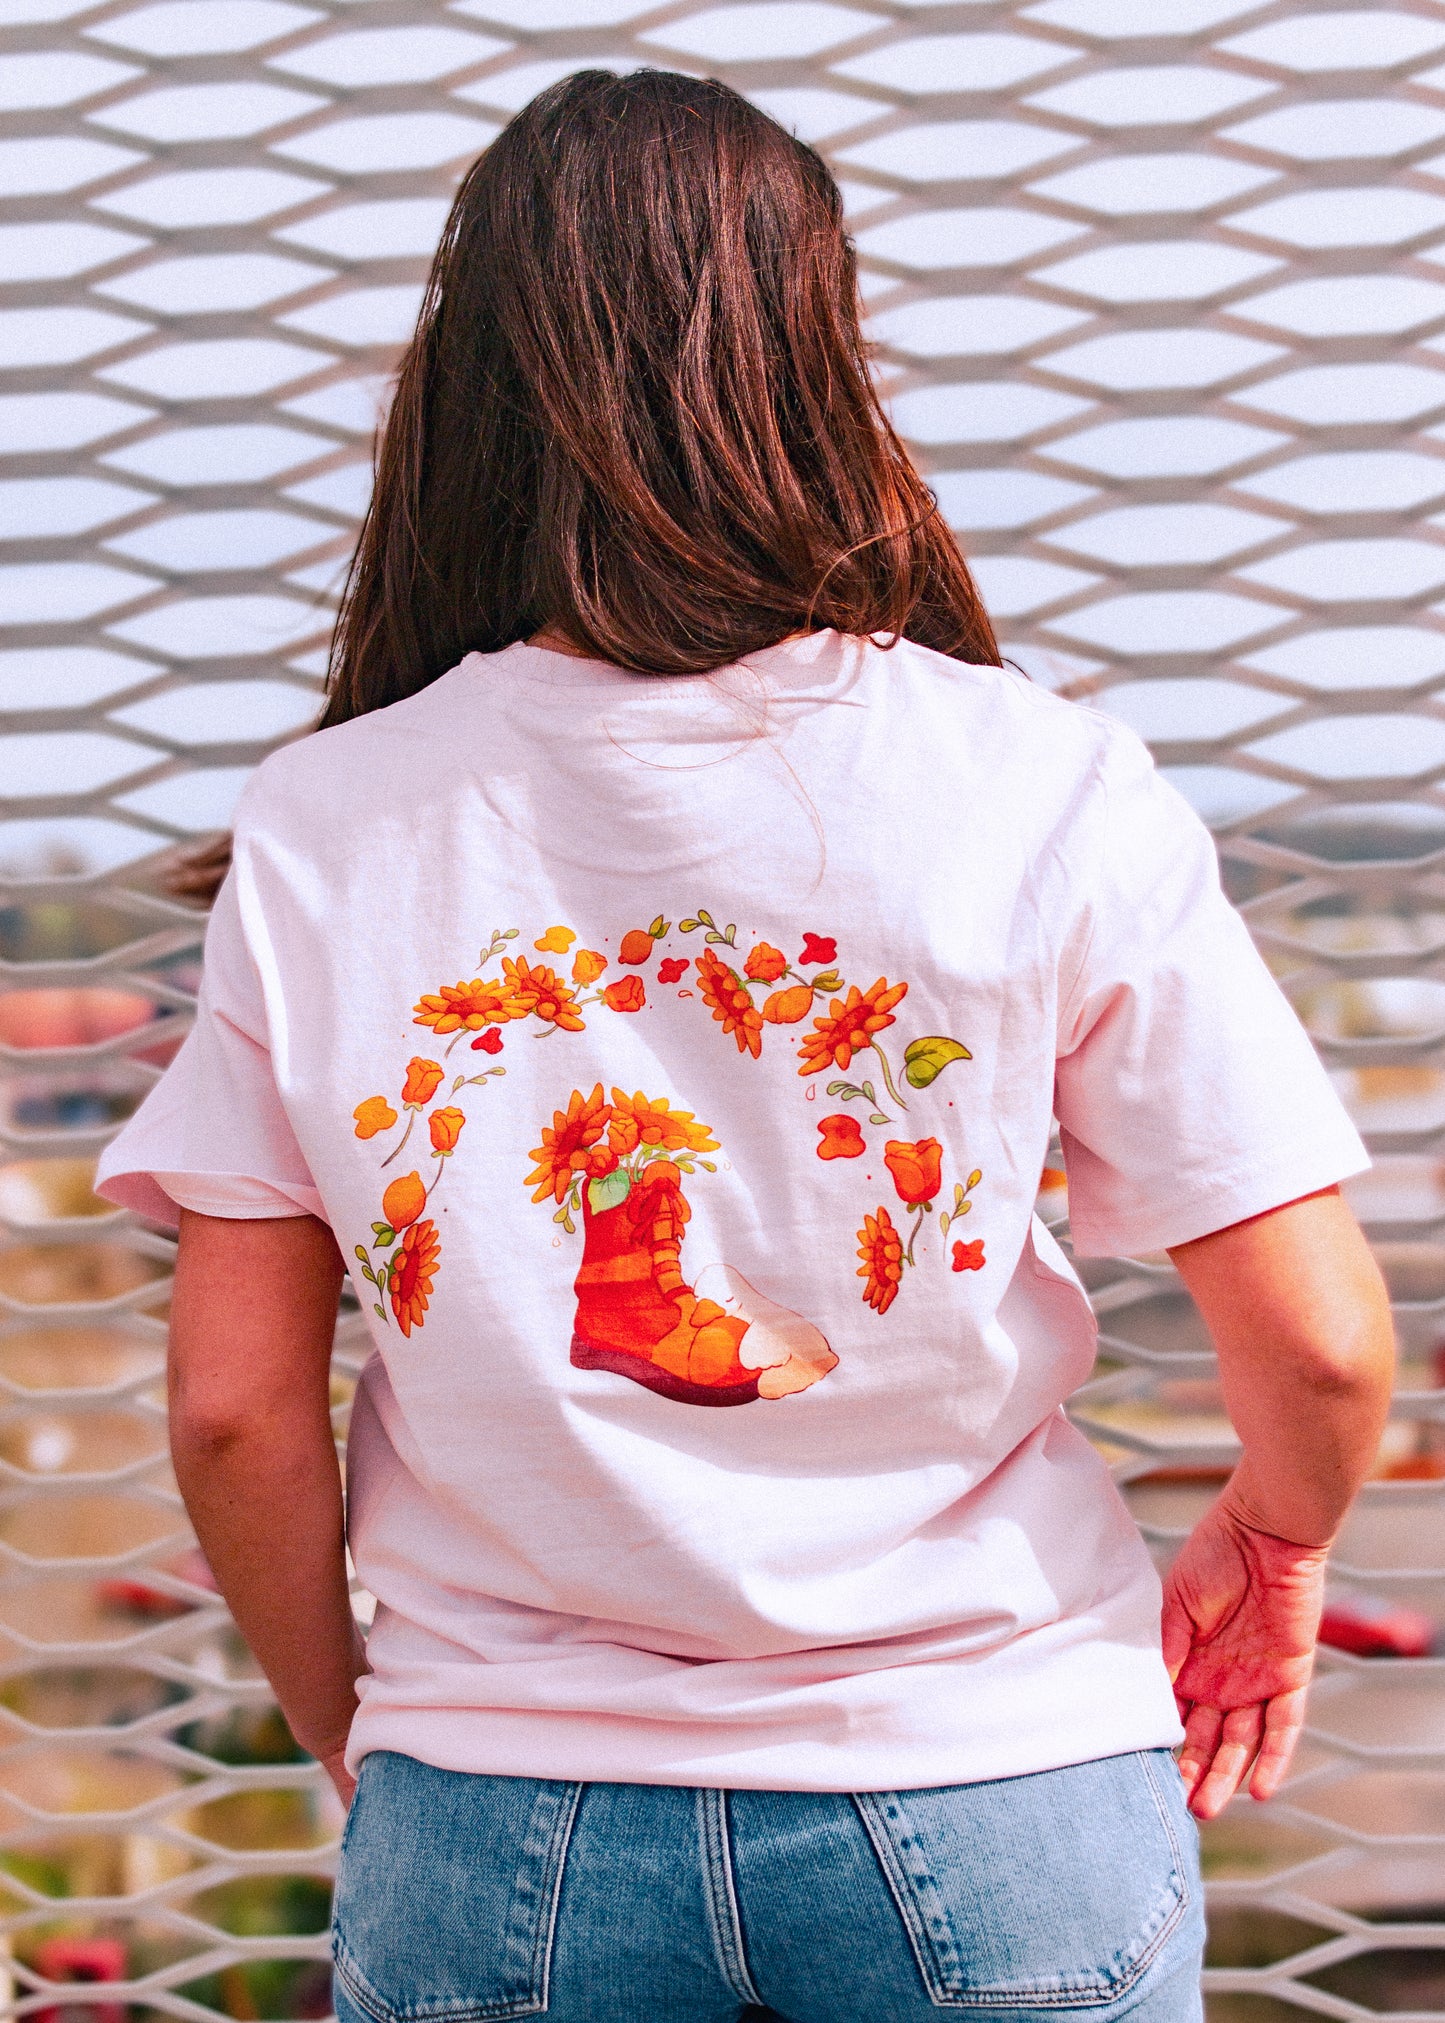 UNISEX T-shirt - Duckling and the flowered boot